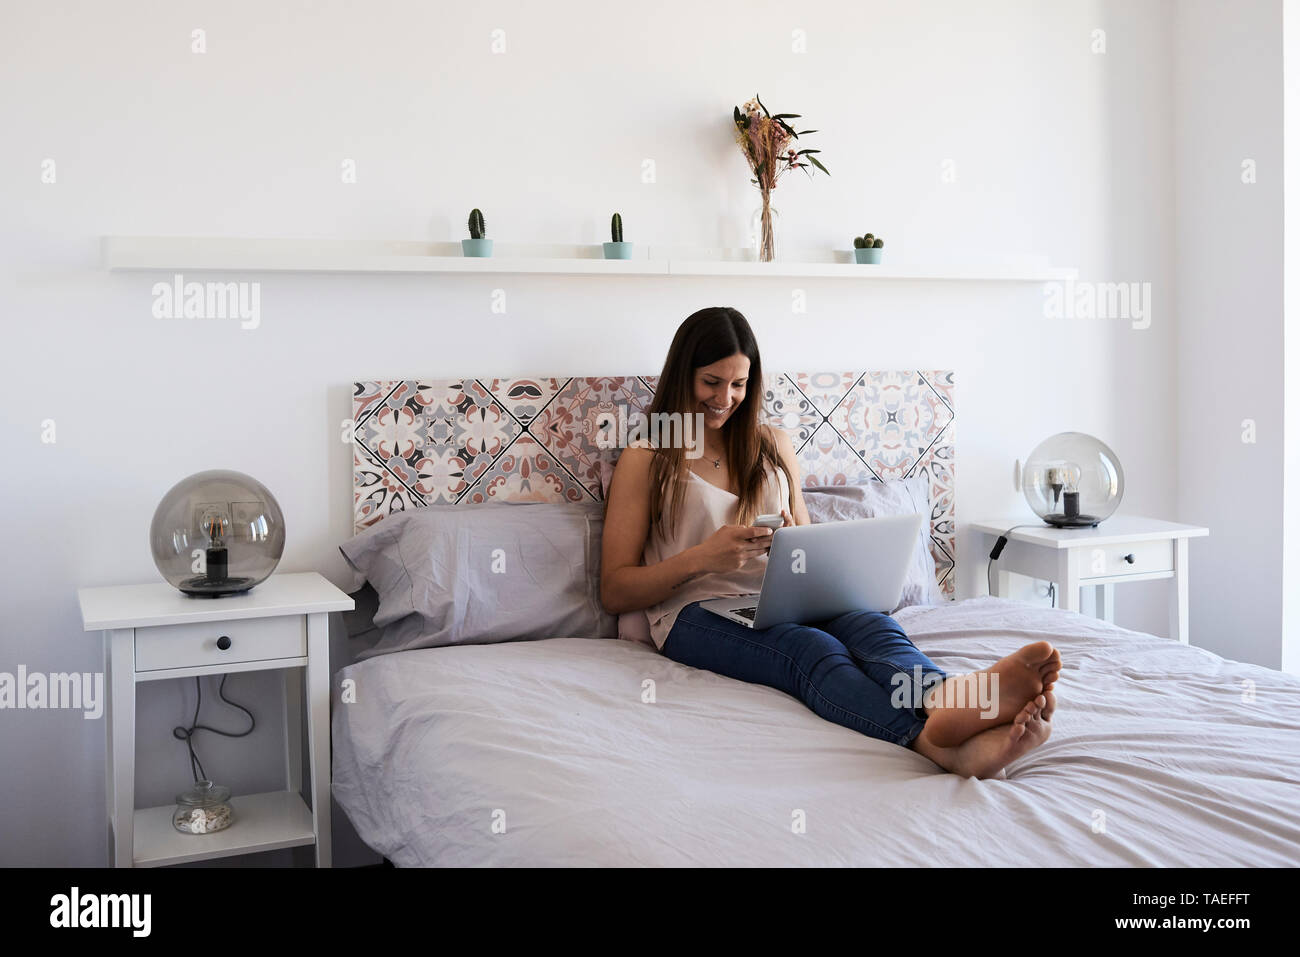 Smiling young woman sitting on bed with laptop using smartphone Stock Photo